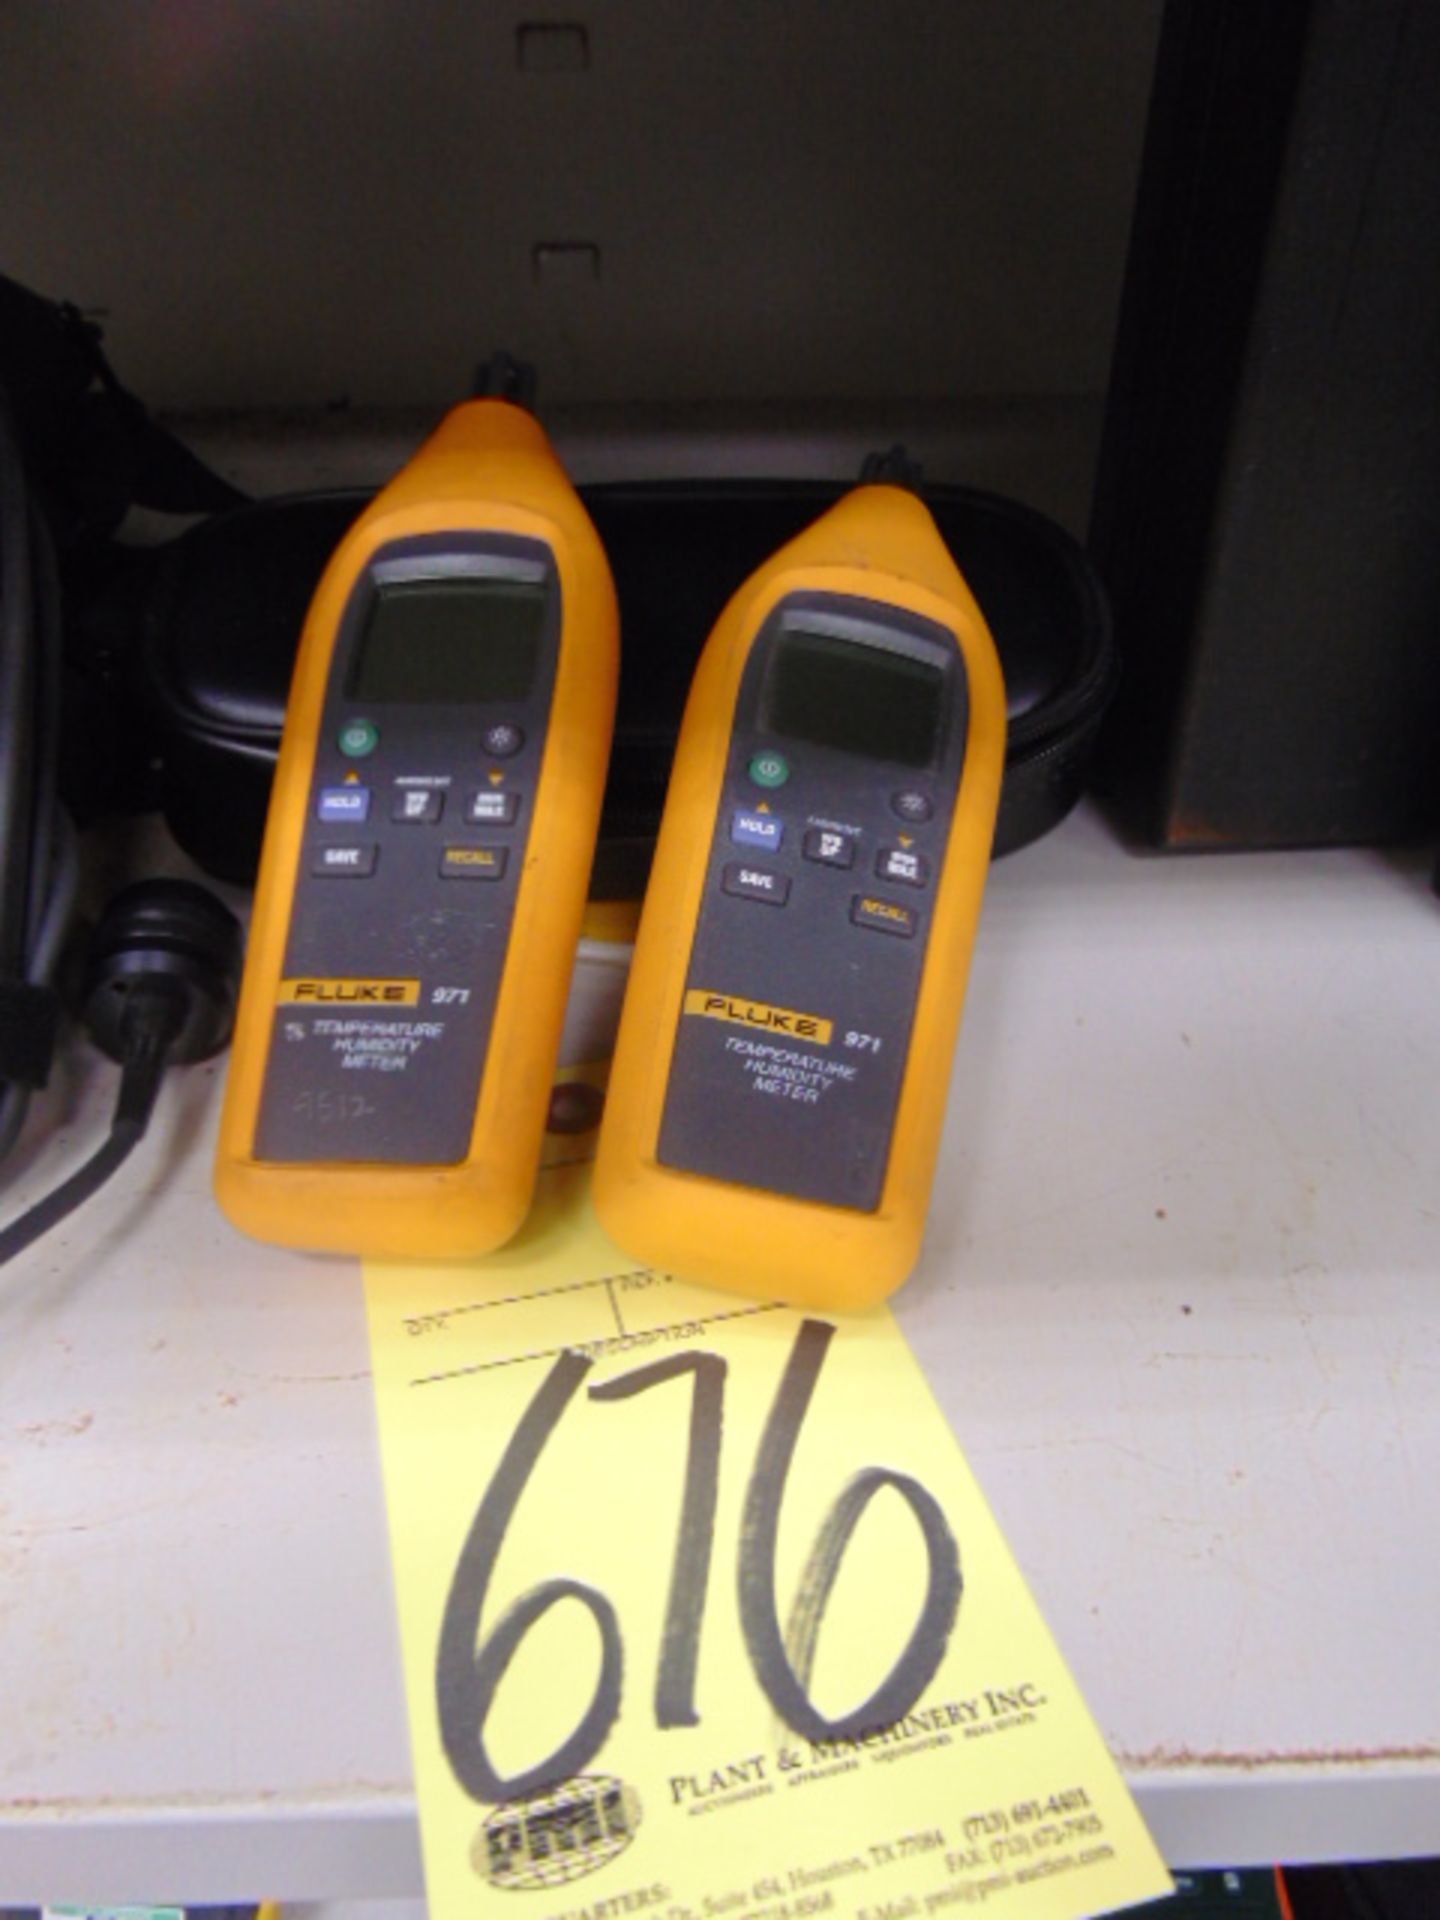 LOT OF TEMPERATURE & HUMIDITY METERS (2), FLUKE MDL. 971